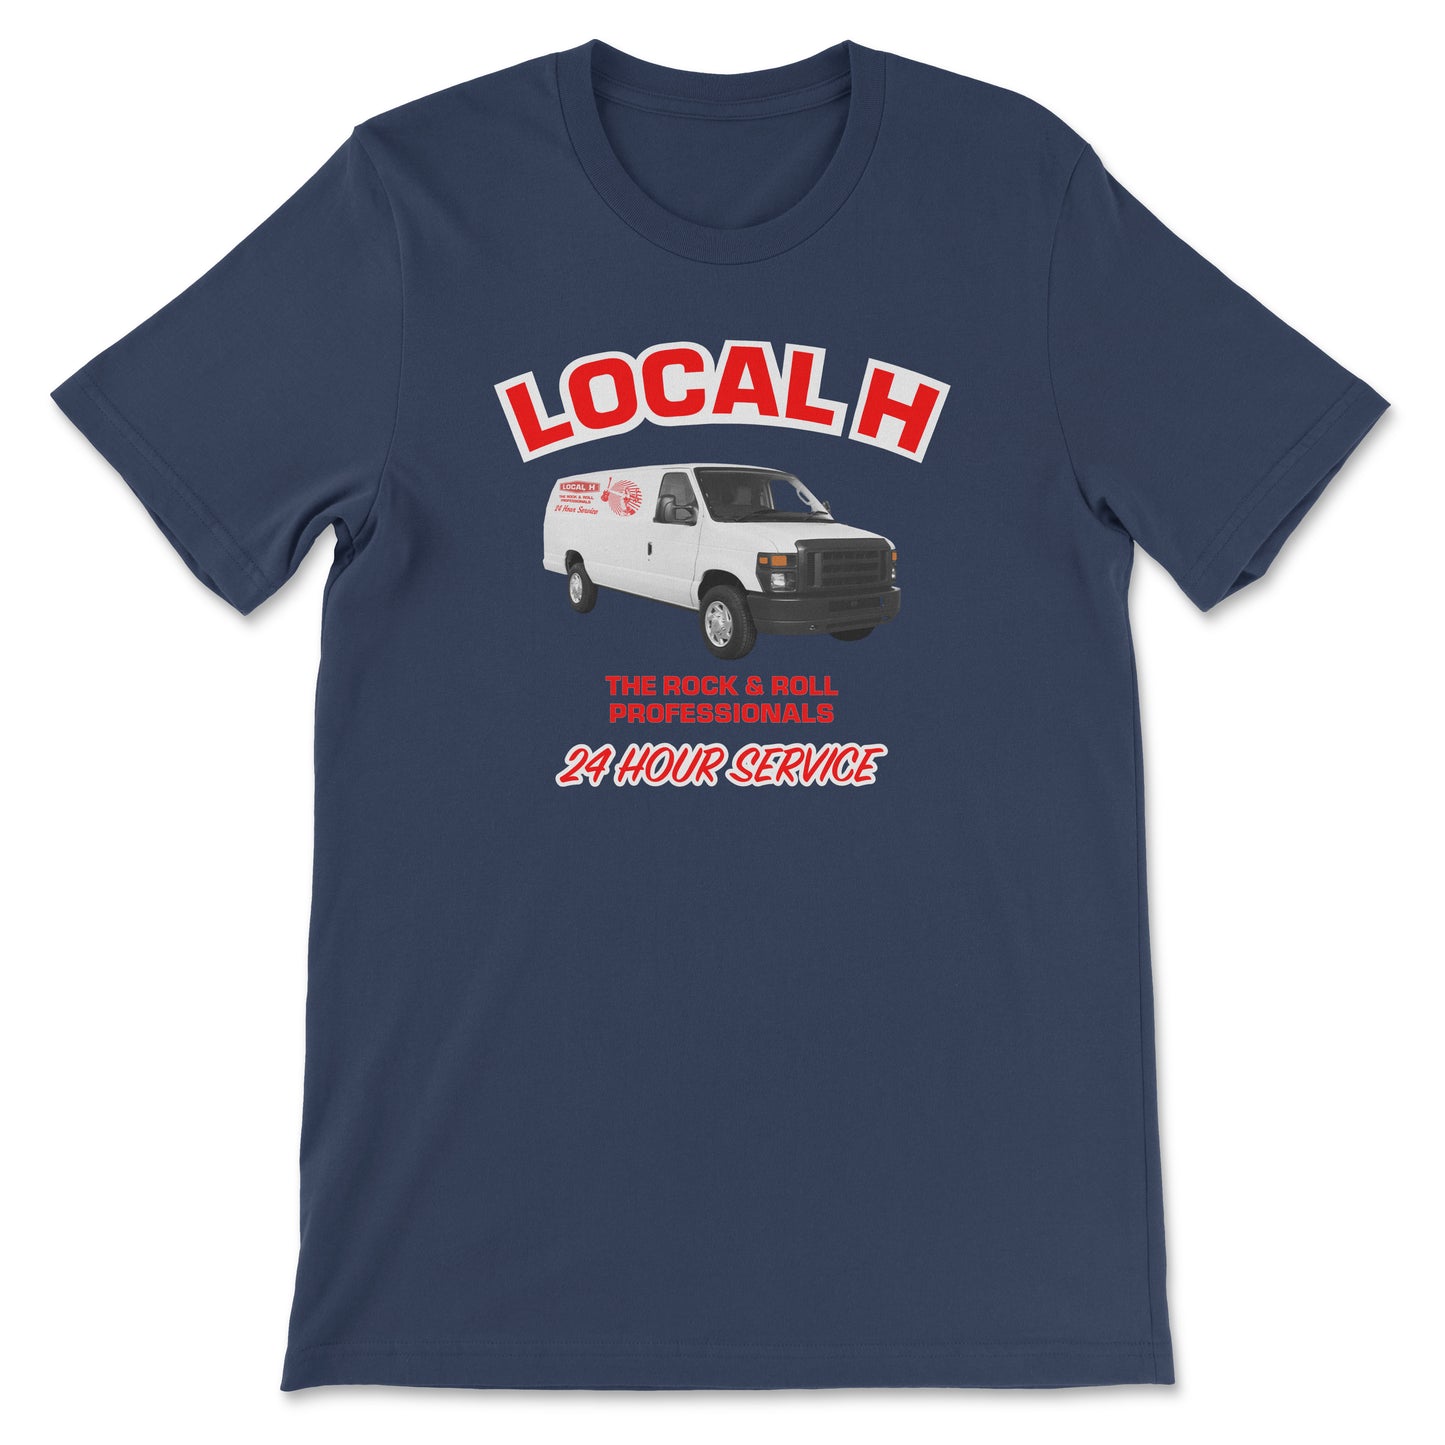 Local H - Rock and Roll Professionals Tee Shirt